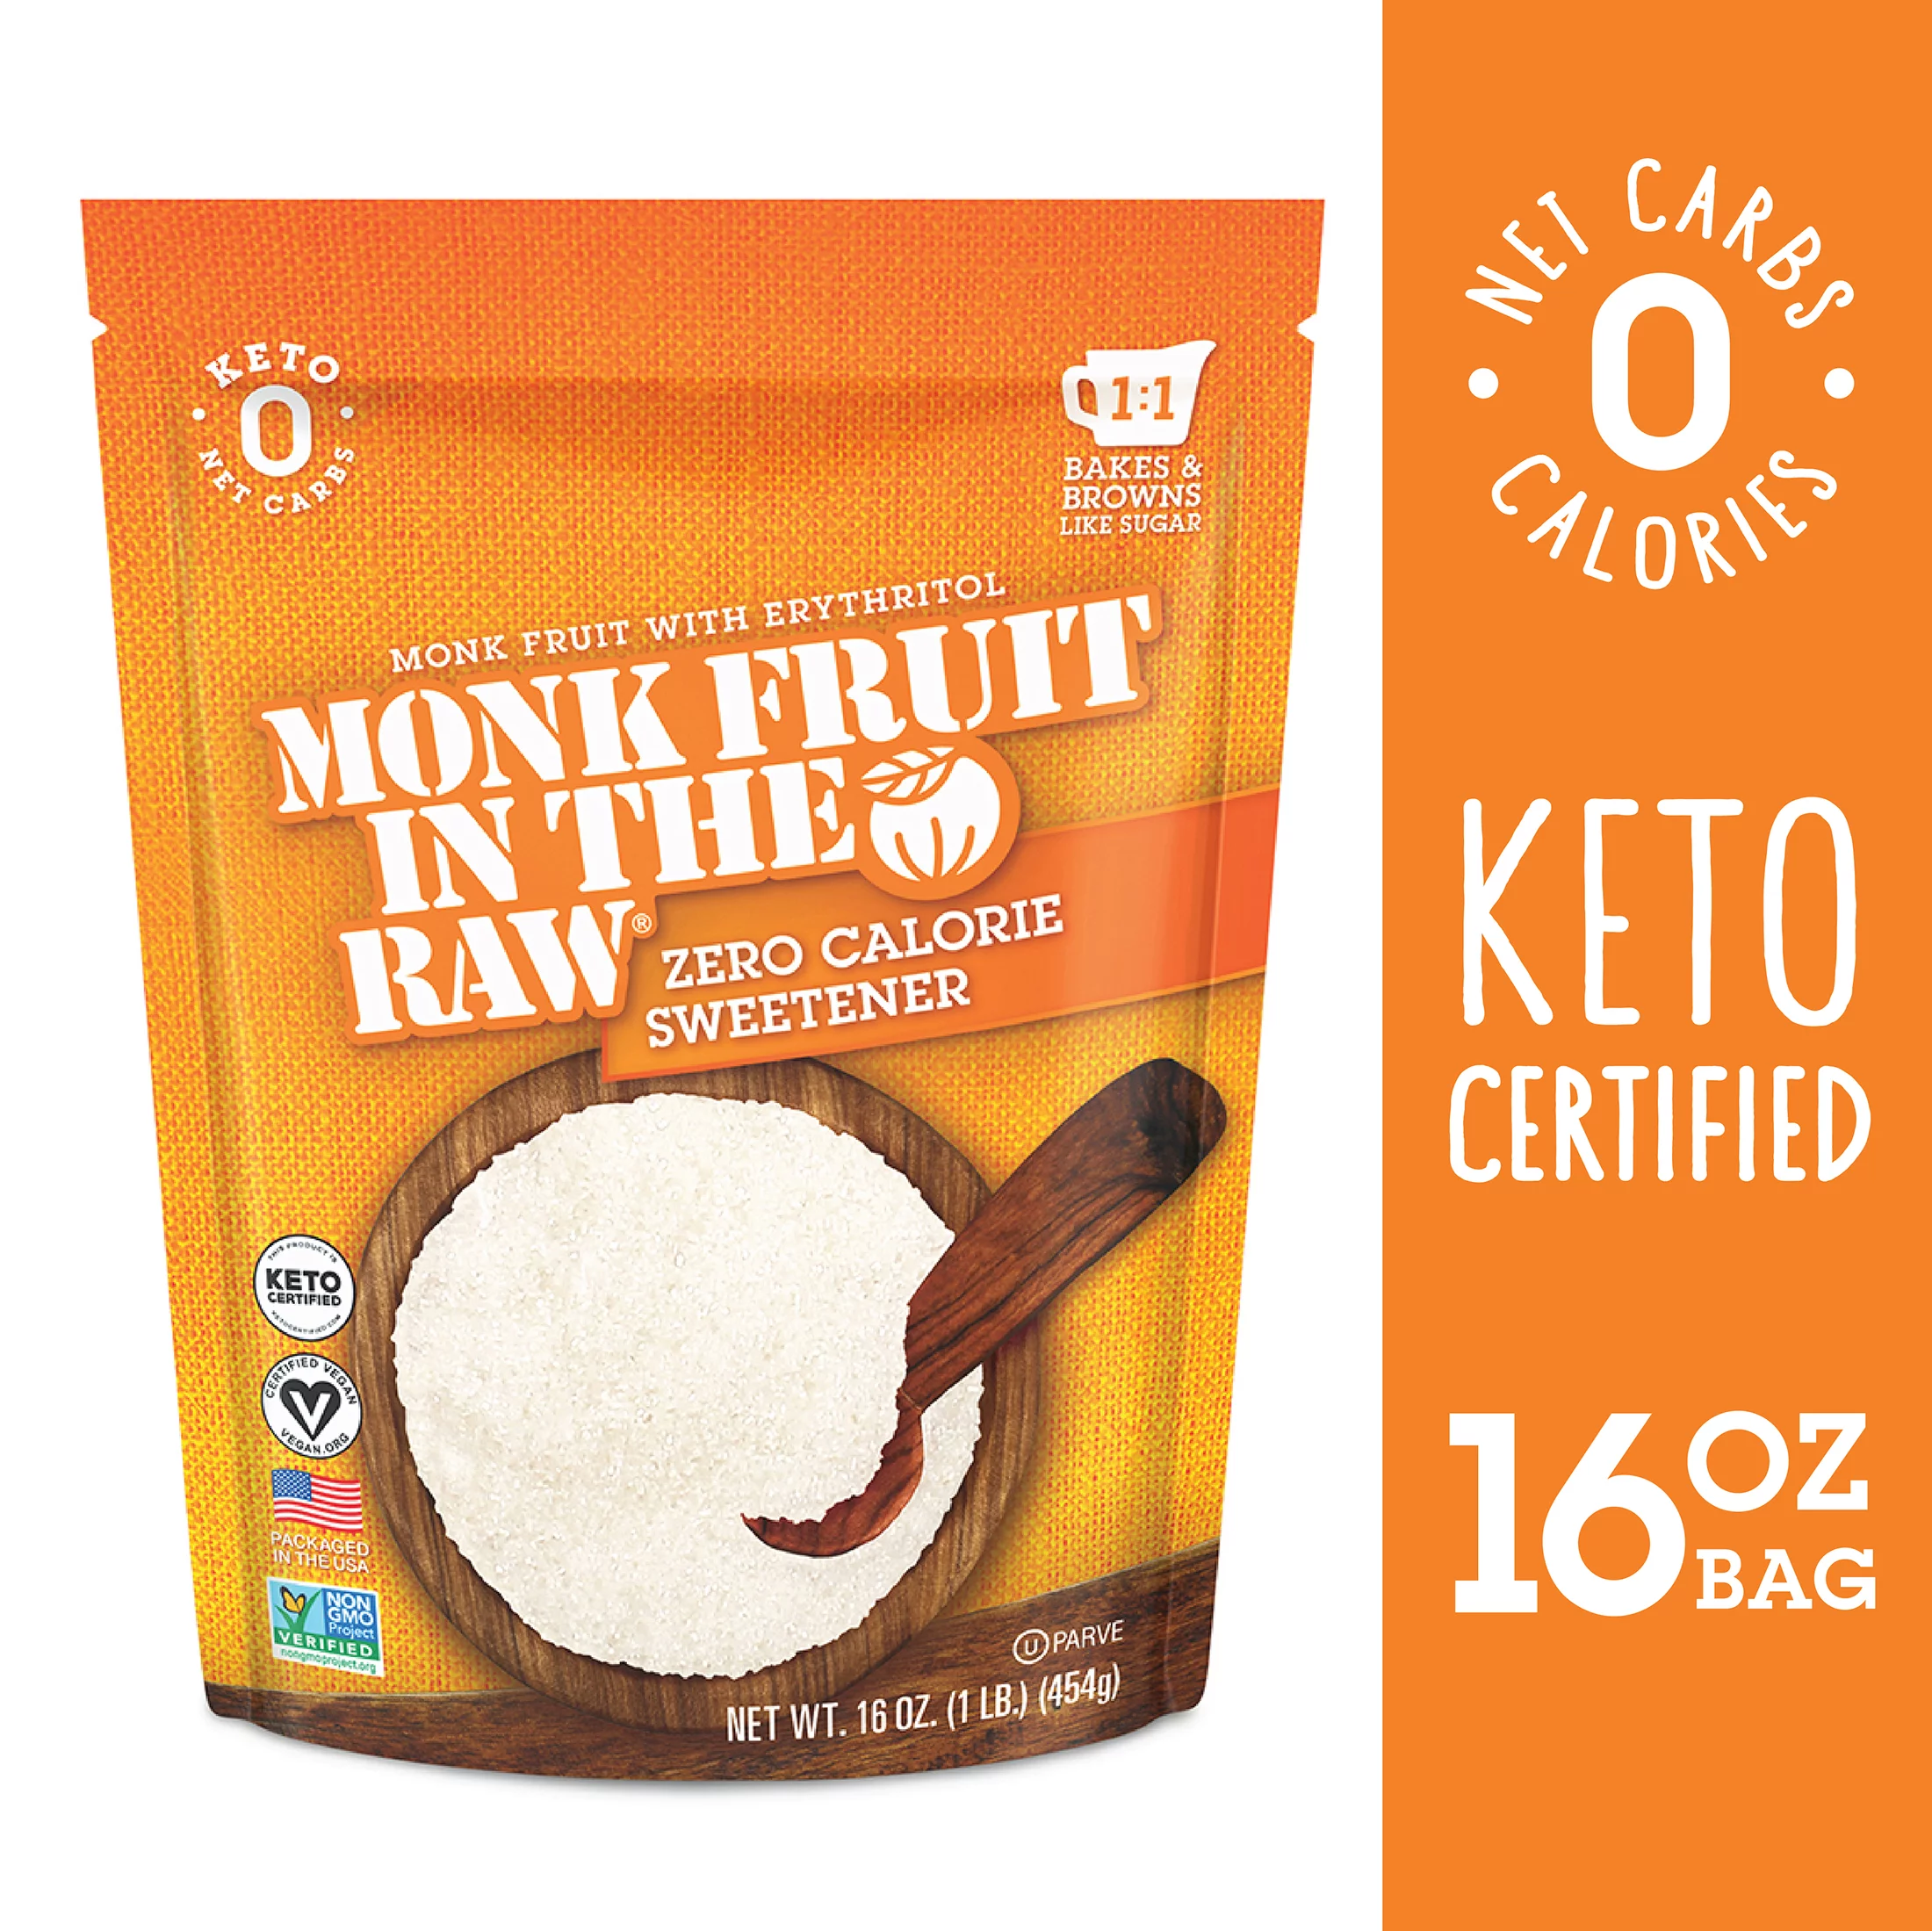 SAVE $1.00 on ONE (1) Monk Fruit In The Raw® Product